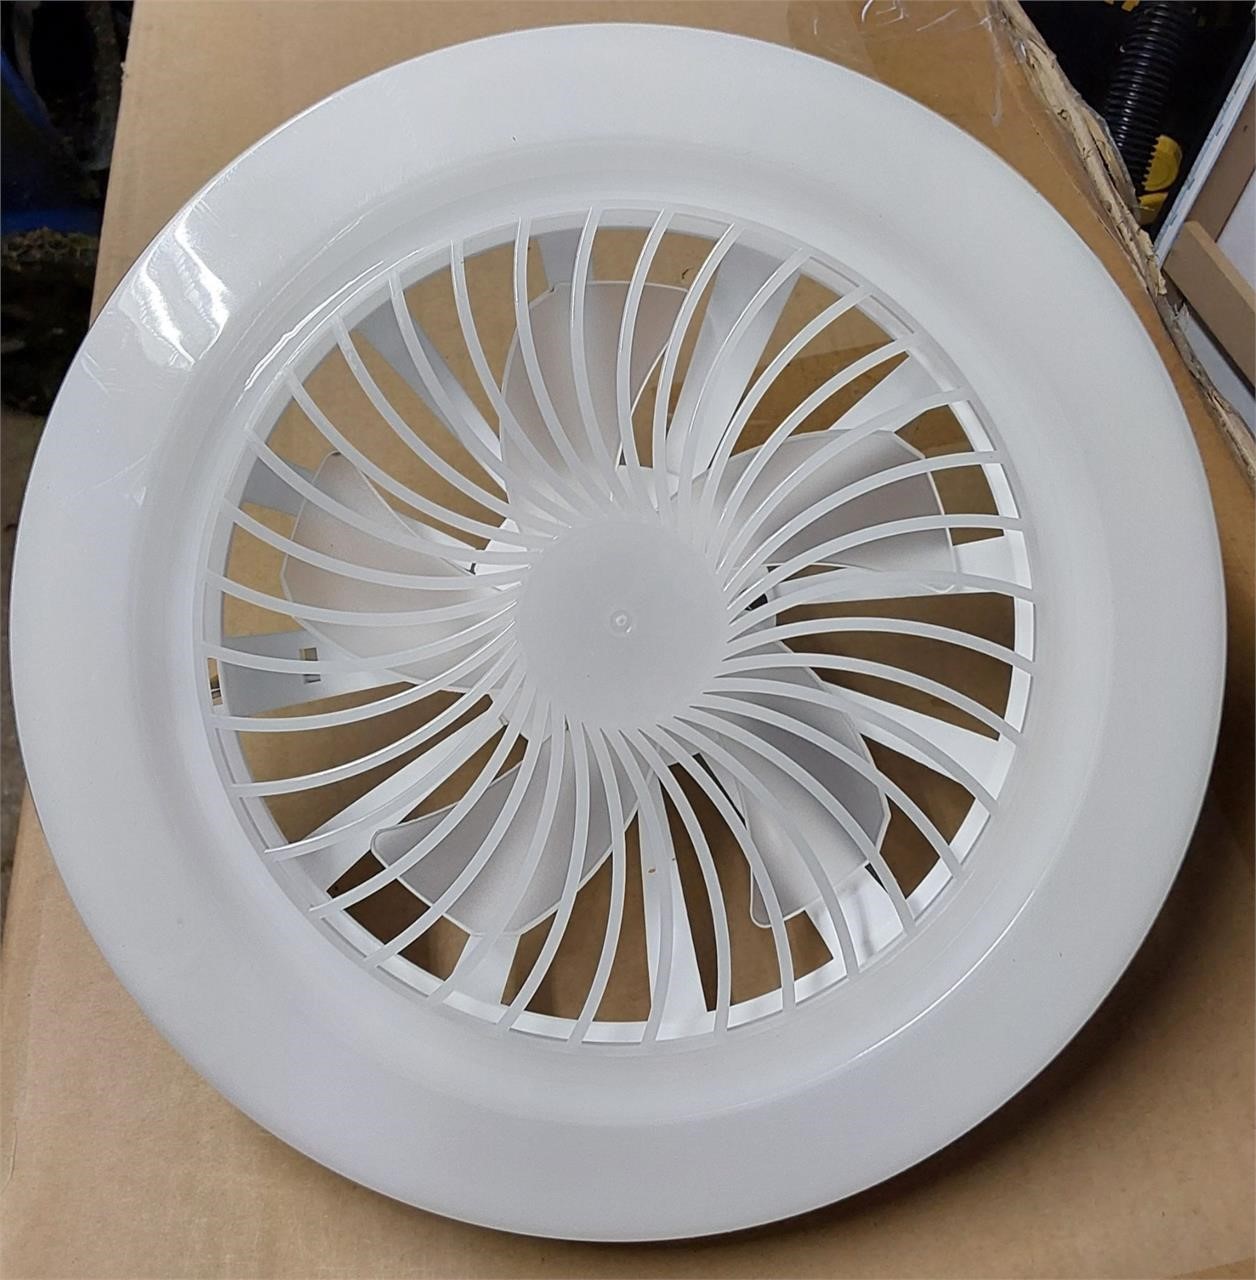 10" LED Light with 6" Fan